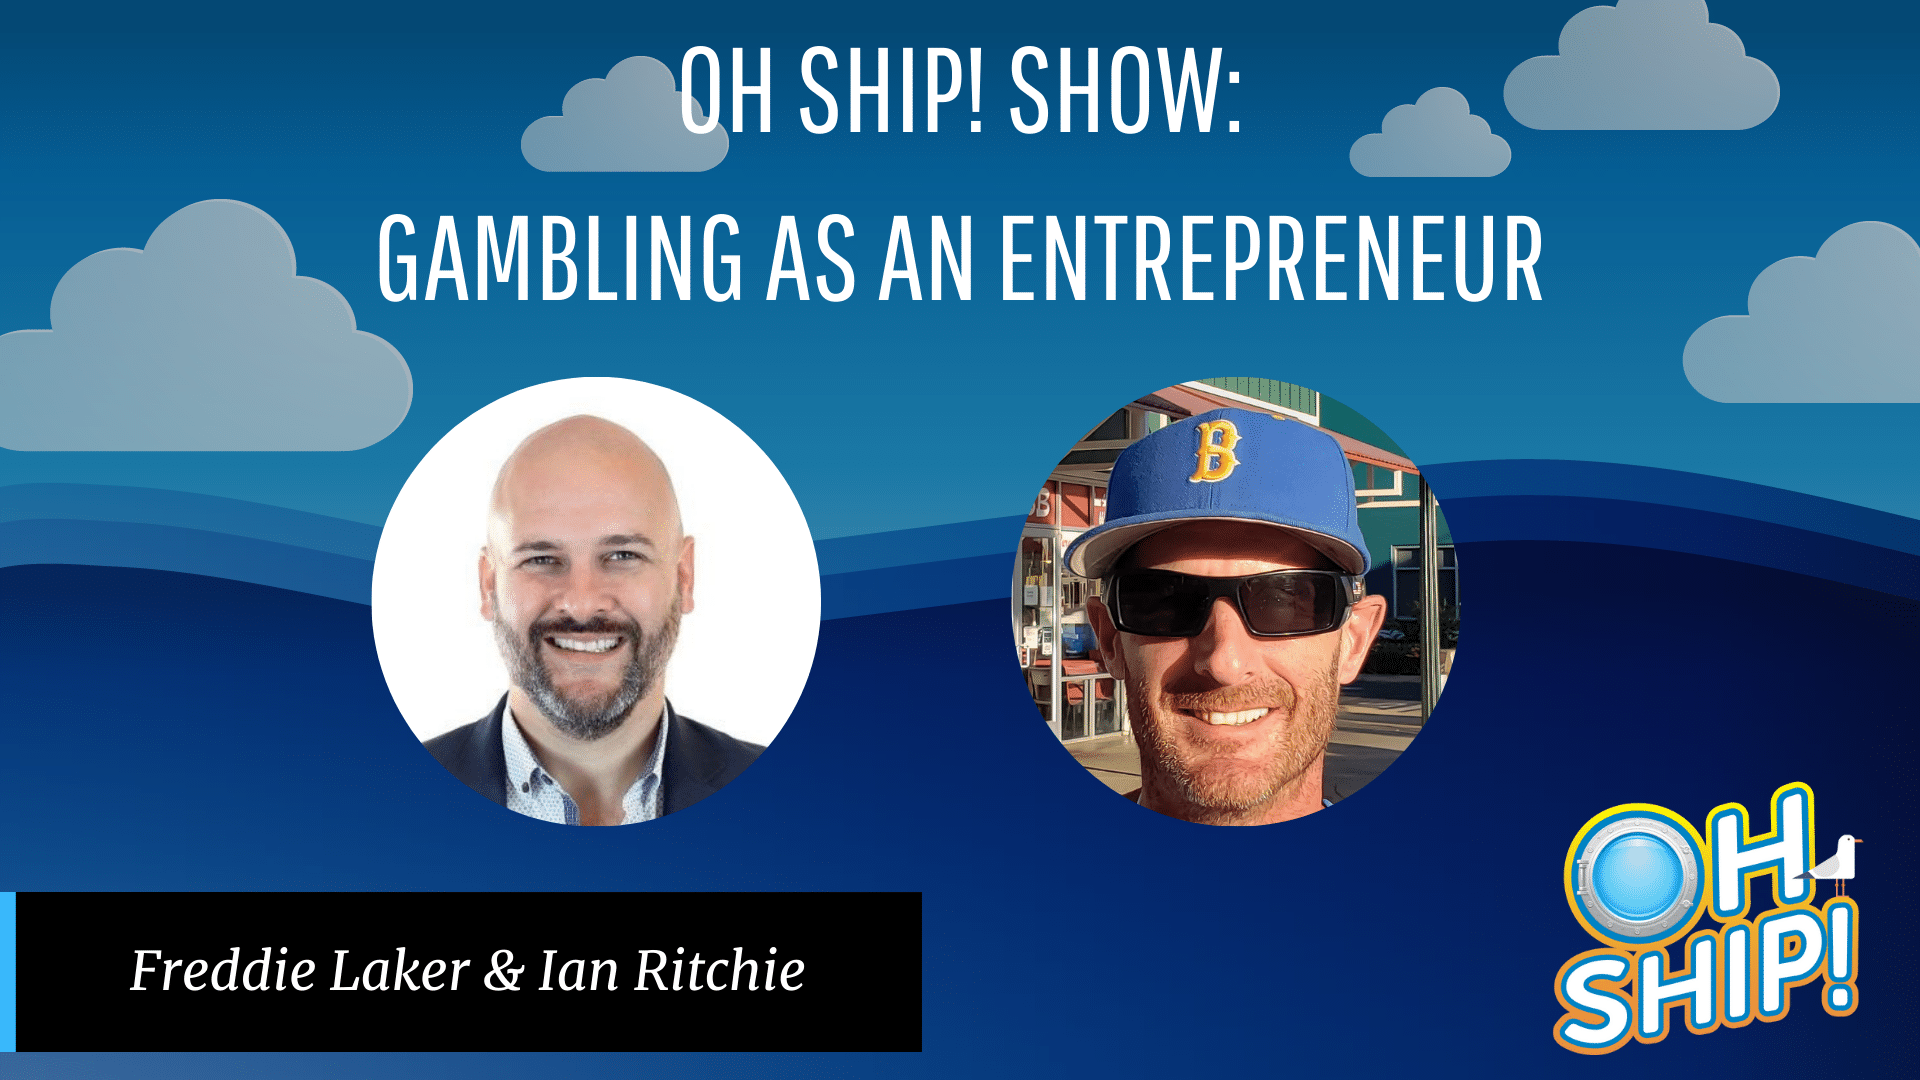 Promo image for the "Oh Ship! Show" episode titled "Gambling as an Entrepreneur." The image features two people: Freddie Laker, a bald man with a beard in a suit, and Ian Ritchie, a man in sunglasses and a cap. The background has clouds and waves, reminiscent of a Sports Illustrated cover.